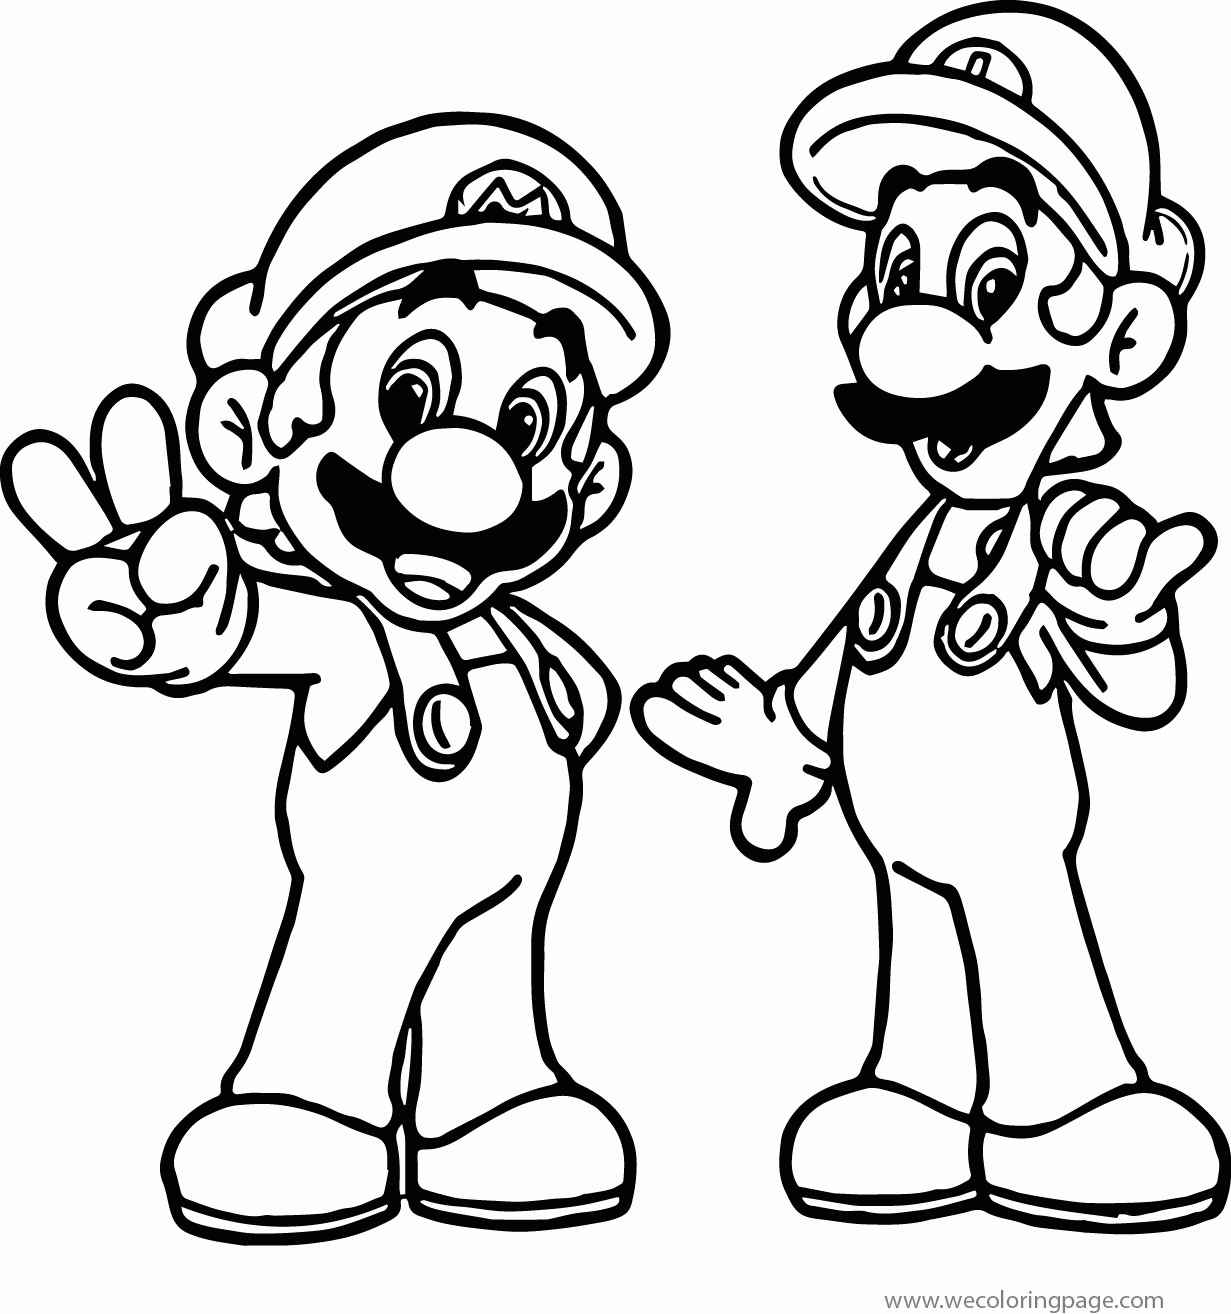 Toad Coloring Pages From Super Mario - Coloring Home